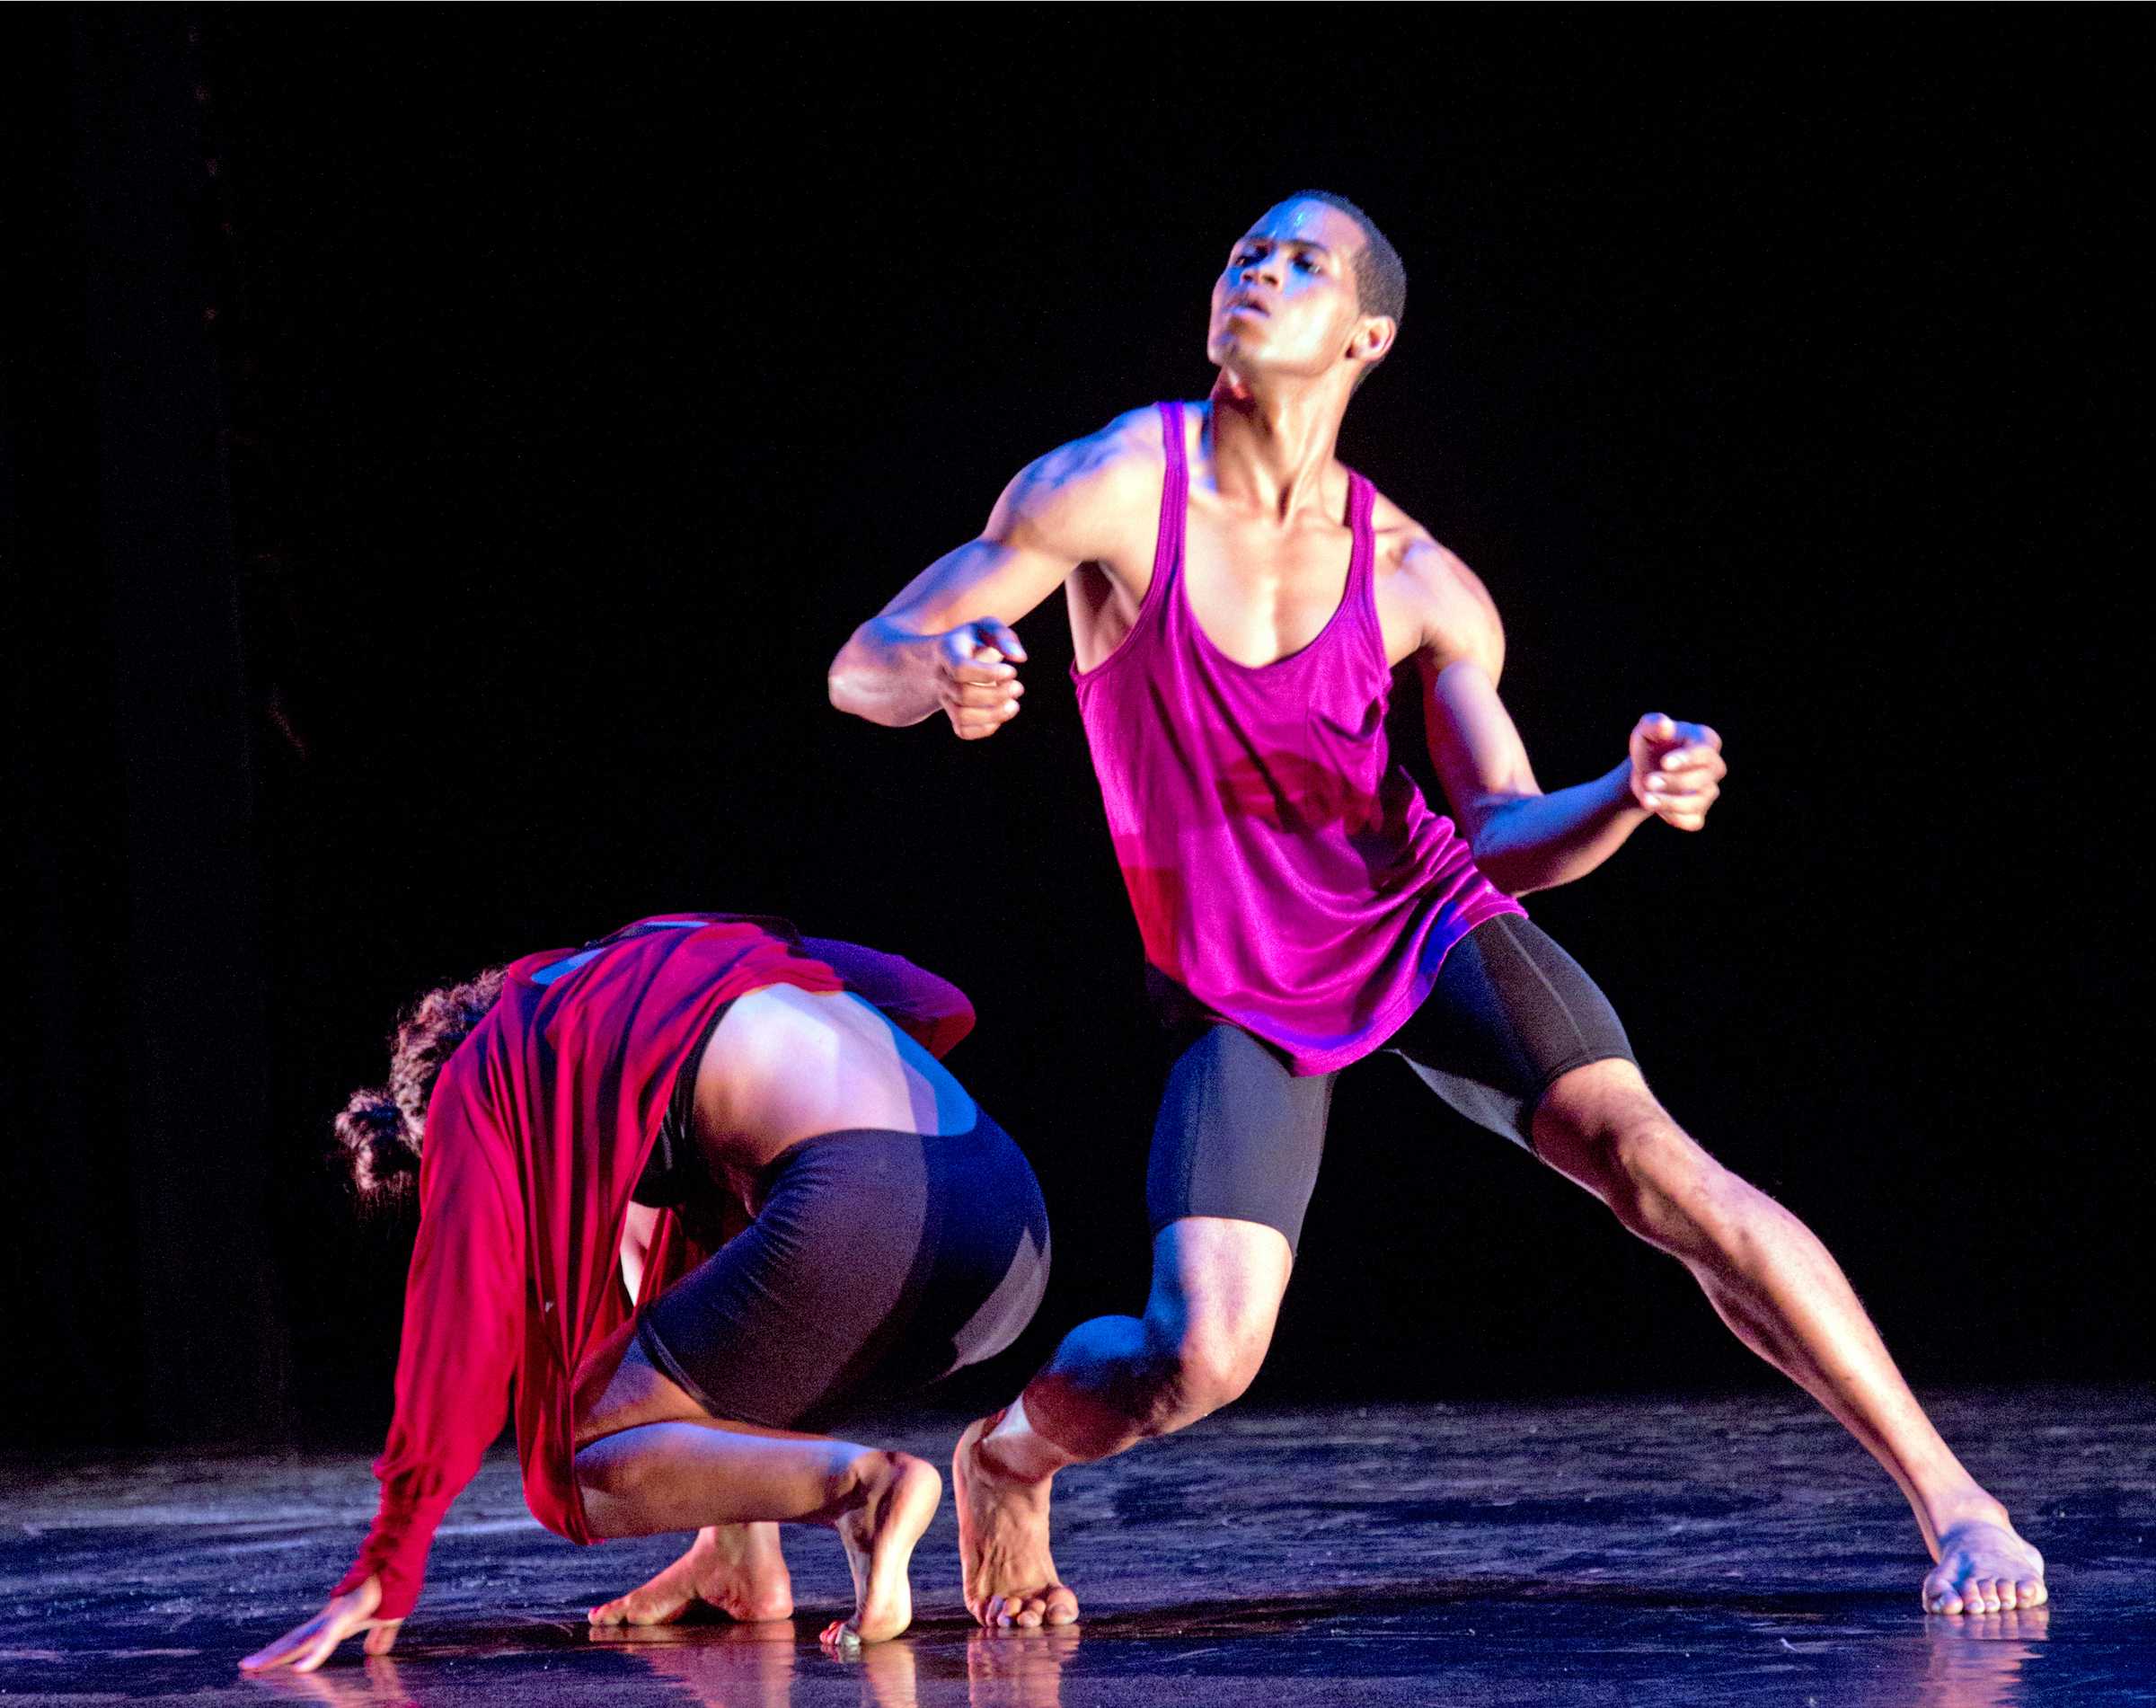 Jamie Nixon, a student at City College, performs a duet for the Young Choreographers Showcase at Saville Theatre on Feb. 23, winning third place. Courtesy photo by Manuel Rotenberg